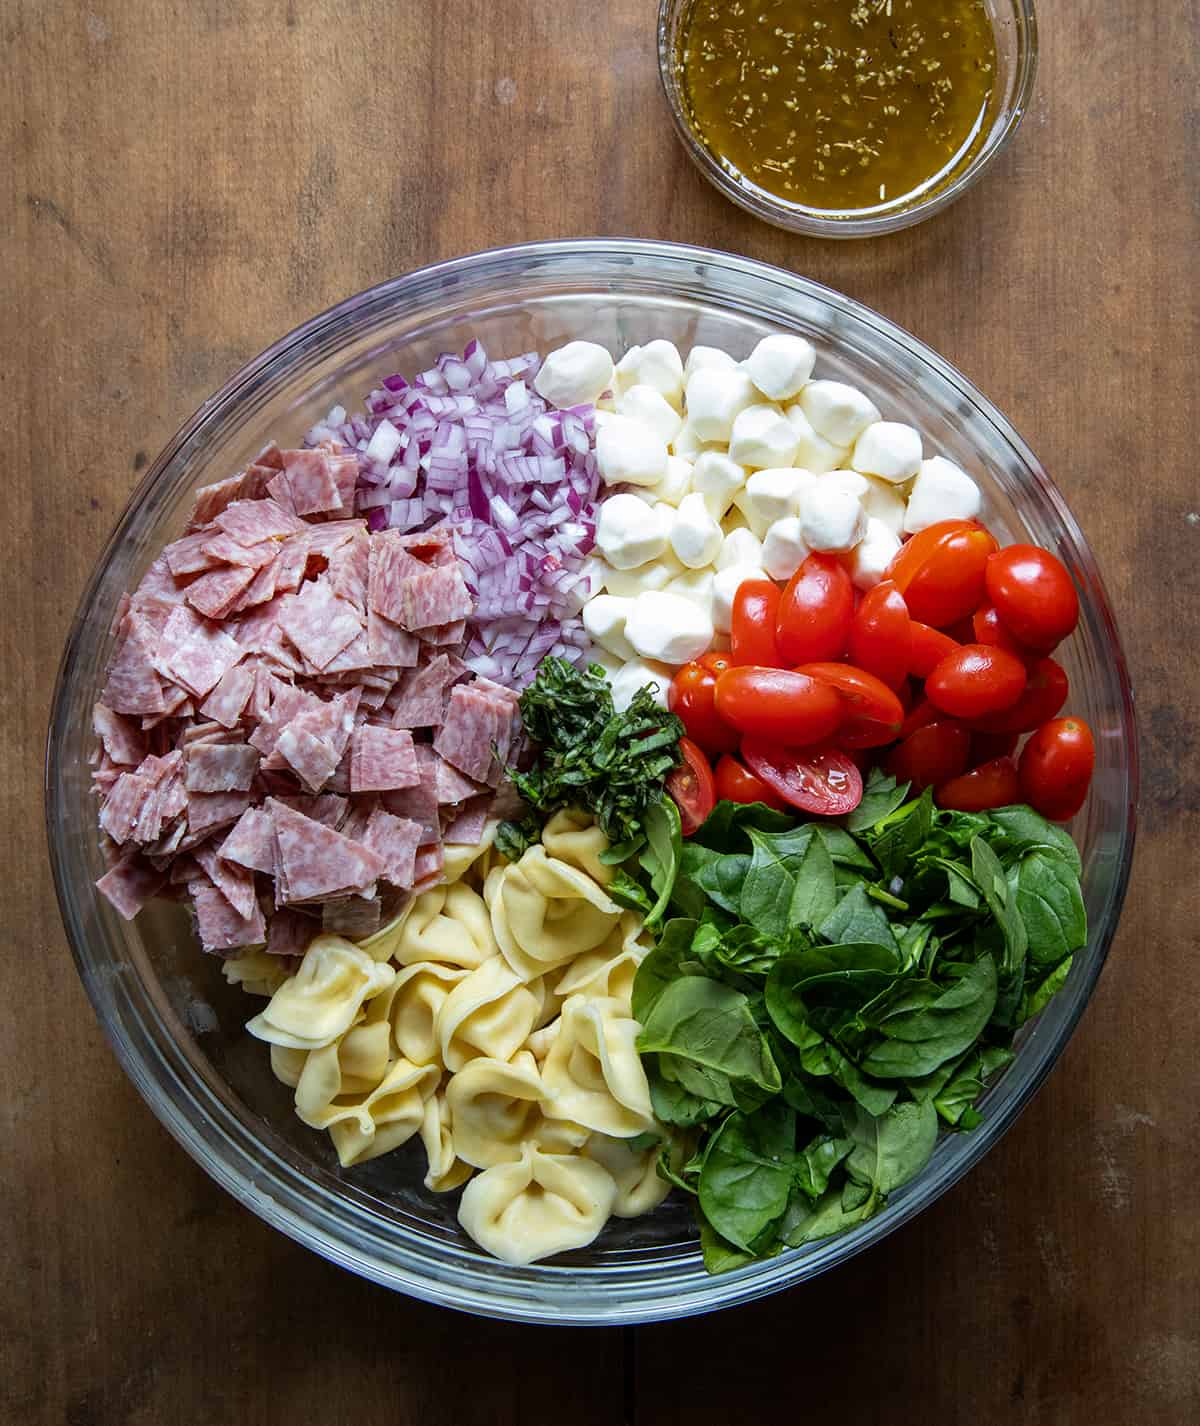 Raw ingredients for Tortellini Pasta Salad in a bowl on a table from overhead.